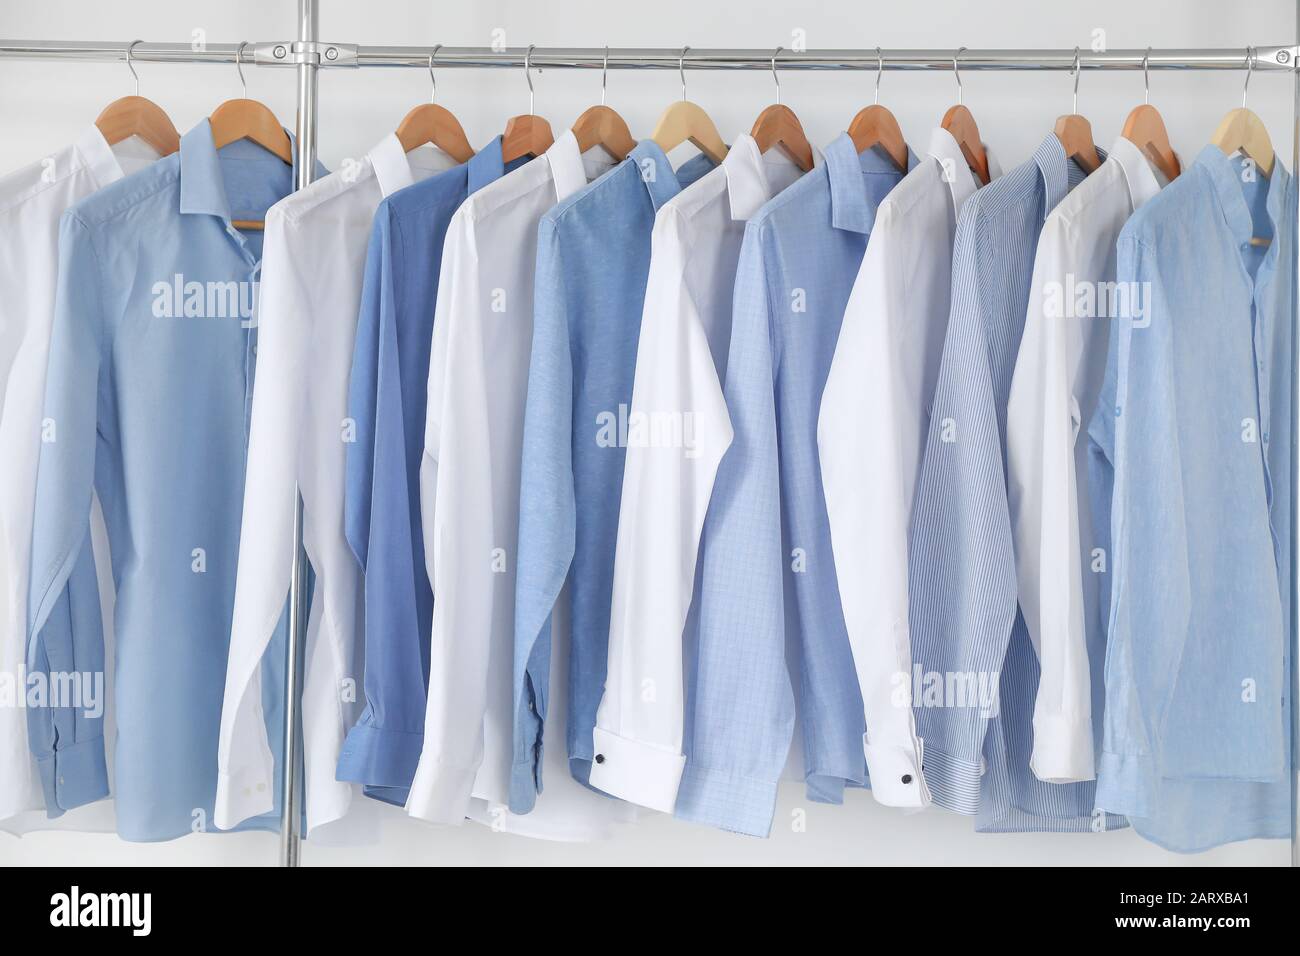 https://c8.alamy.com/comp/2ARXBA1/rack-with-clothes-in-modern-dry-cleaners-2ARXBA1.jpg